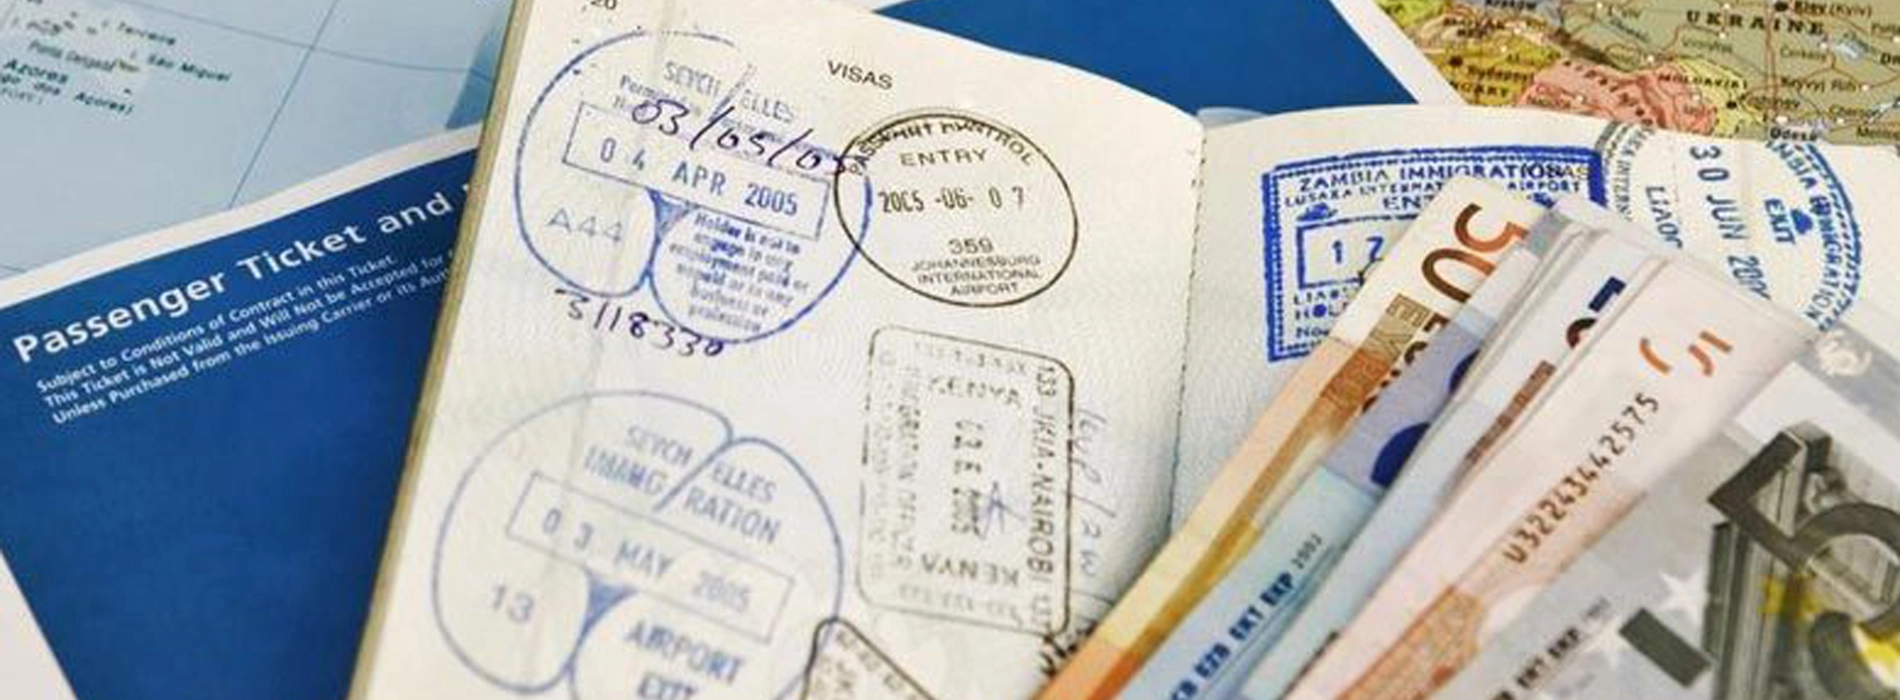 Travel Documents Required for going from Vietnam to Cambodia